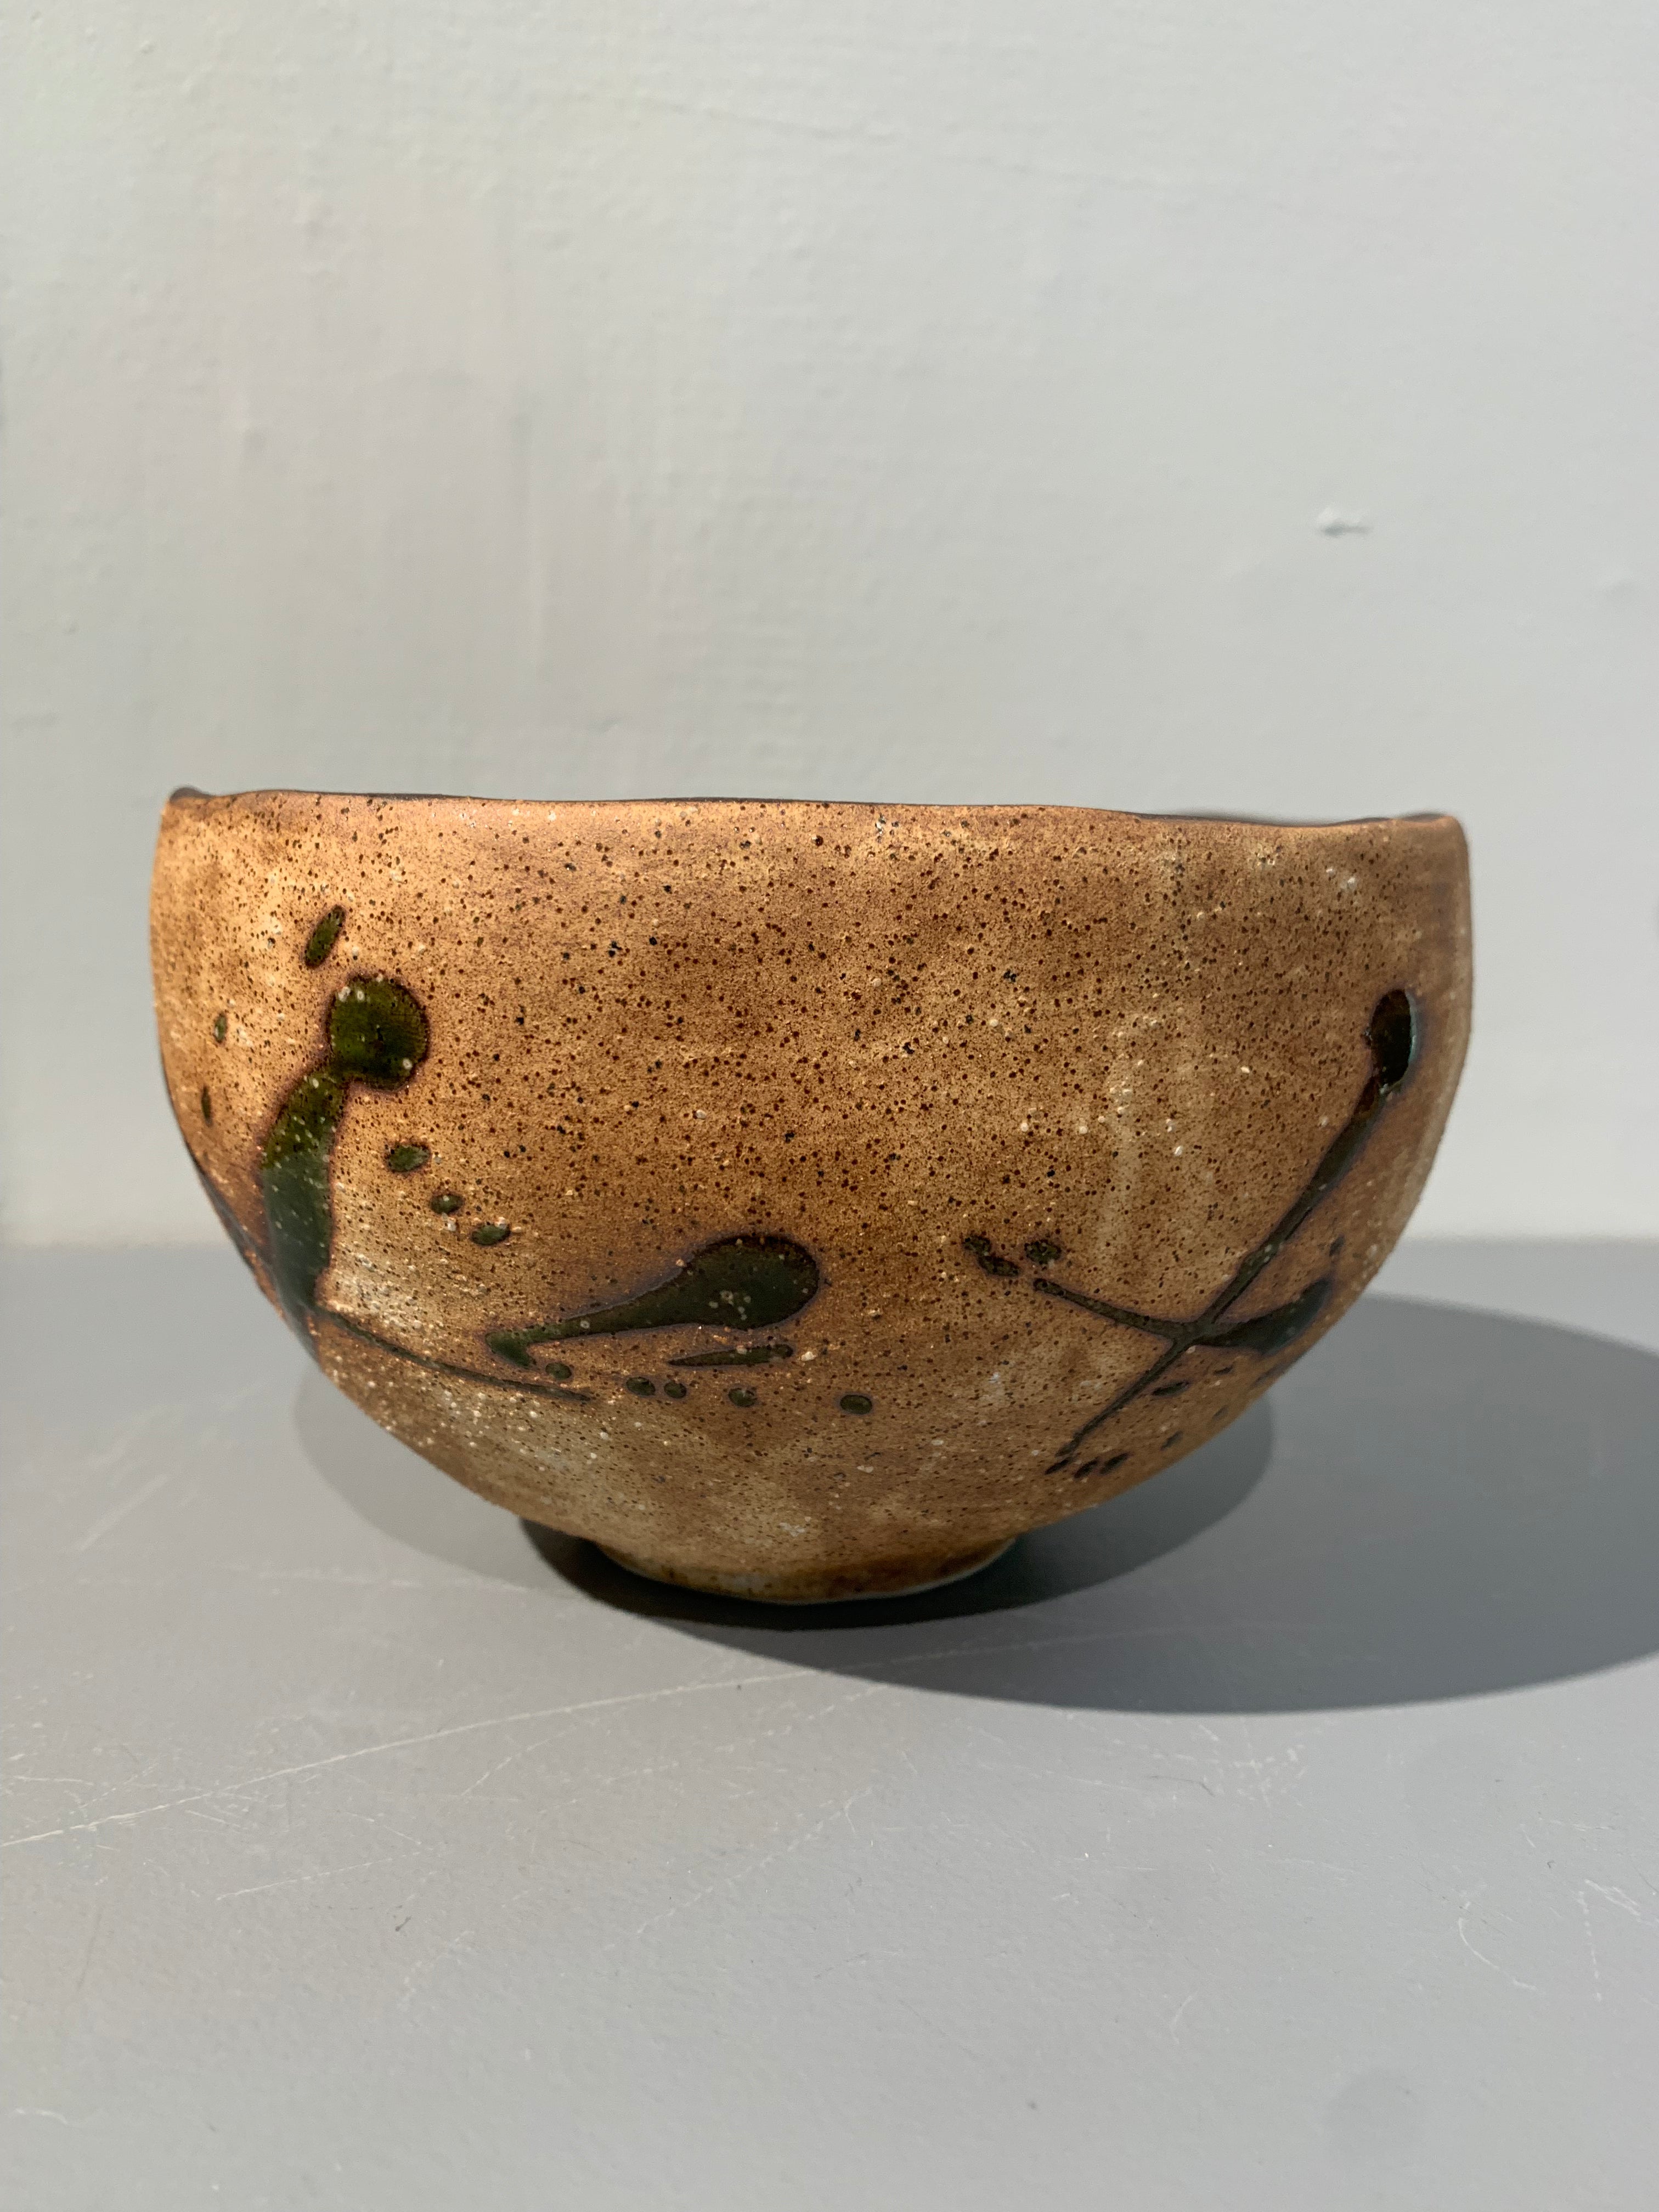 Brown noodle bowl with rough surface